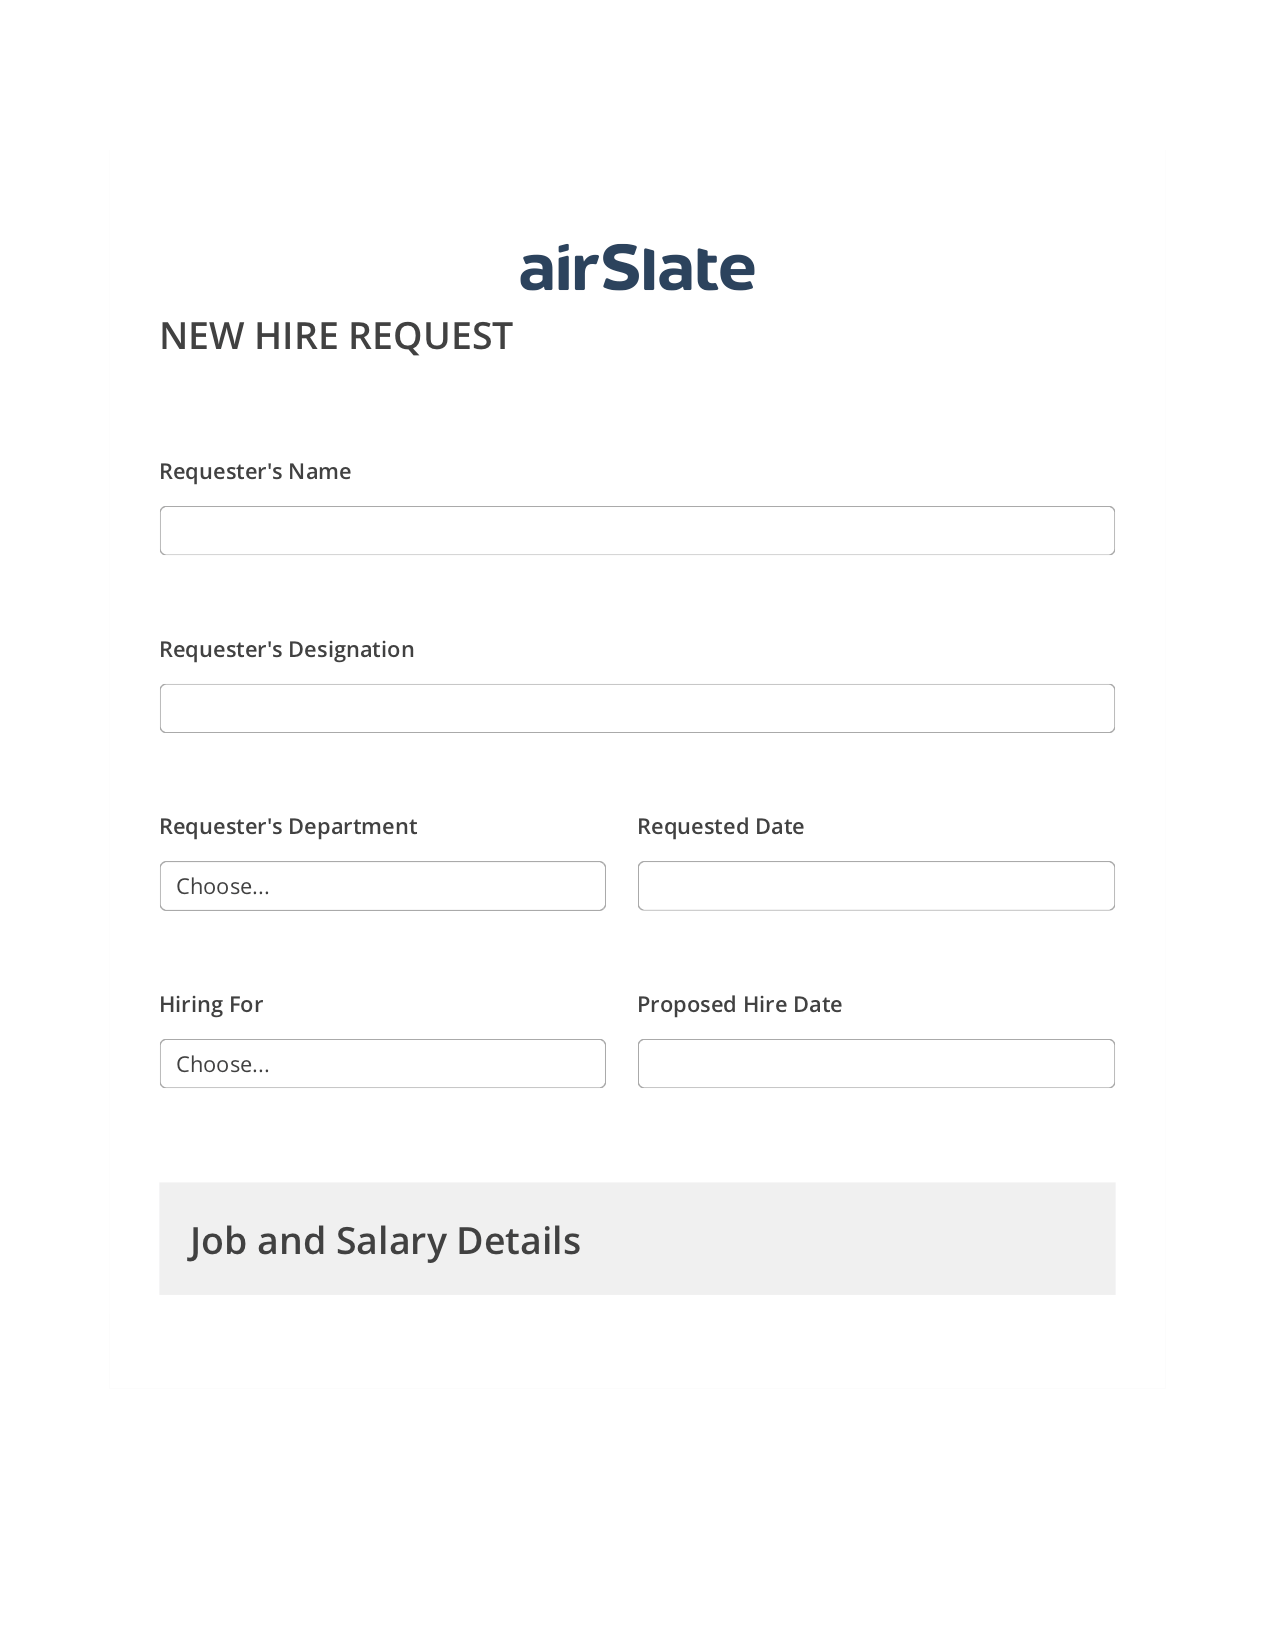 Hiring Request Workflow Pre-fill Dropdowns from MySQL Bot, Send a Slate to MS Dynamics 365 Contact Bot, Archive to Dropbox Bot